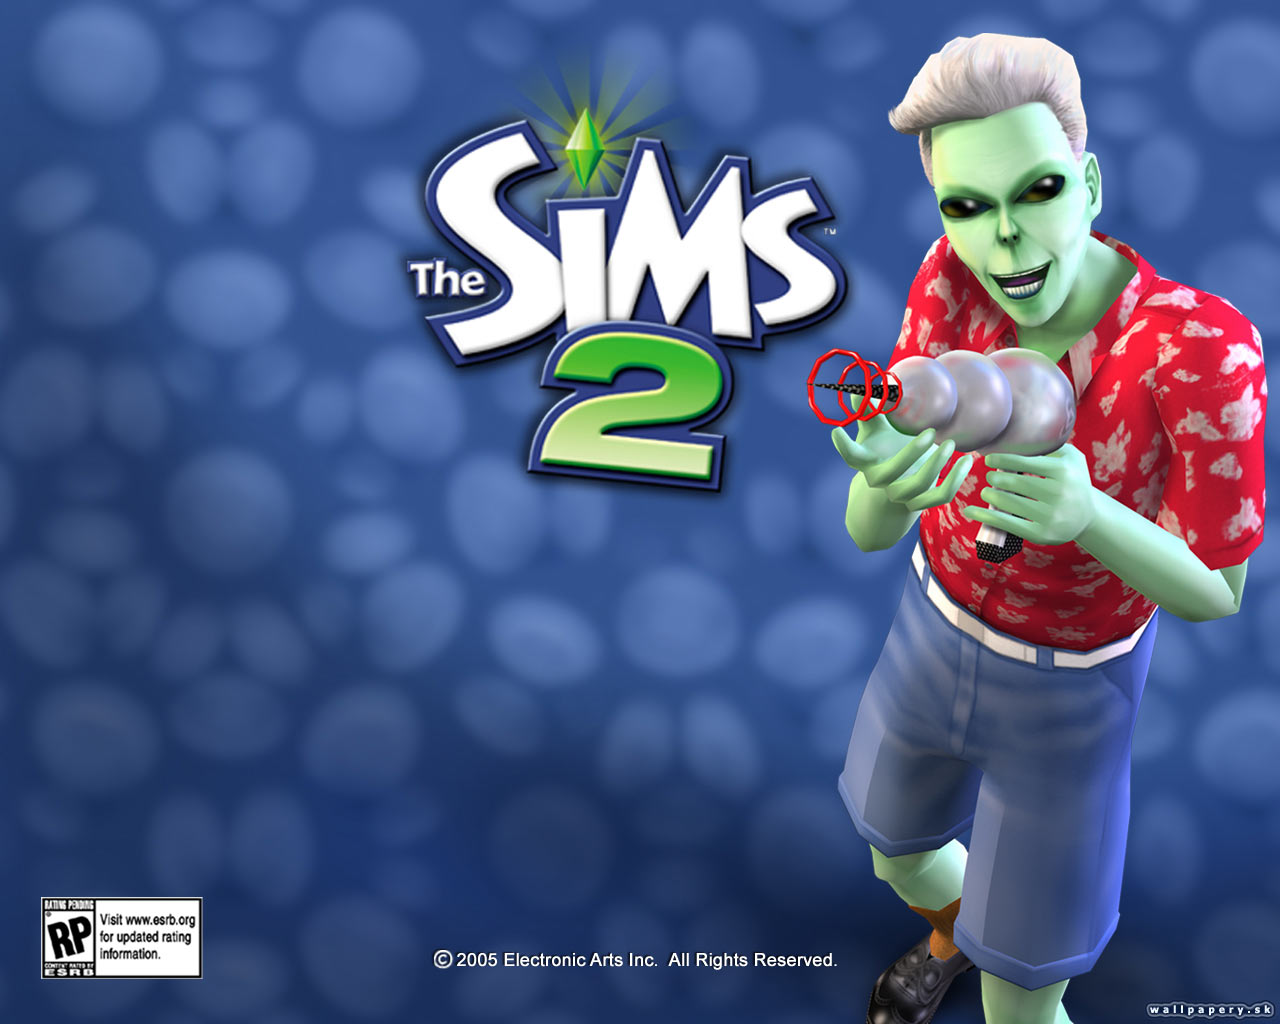 The Sims 2 - wallpaper 29